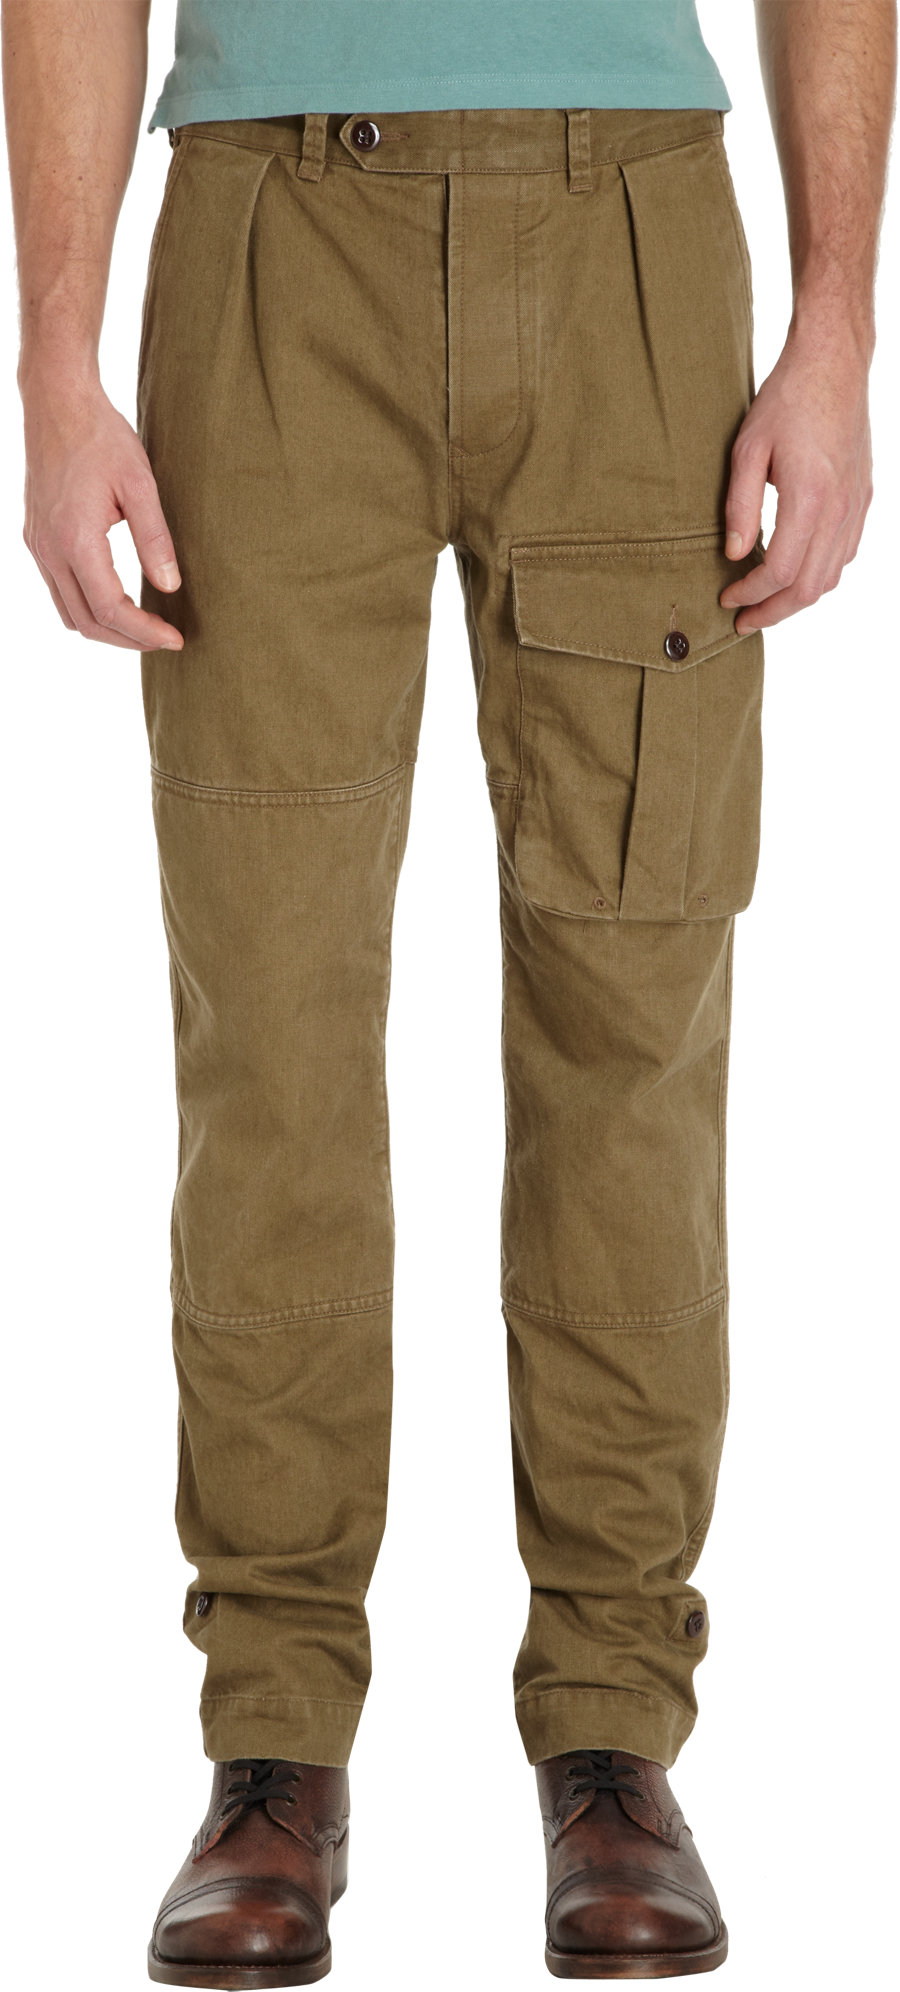 Todd Synder X Champion Cargo Trousers in Brown for Men - Lyst